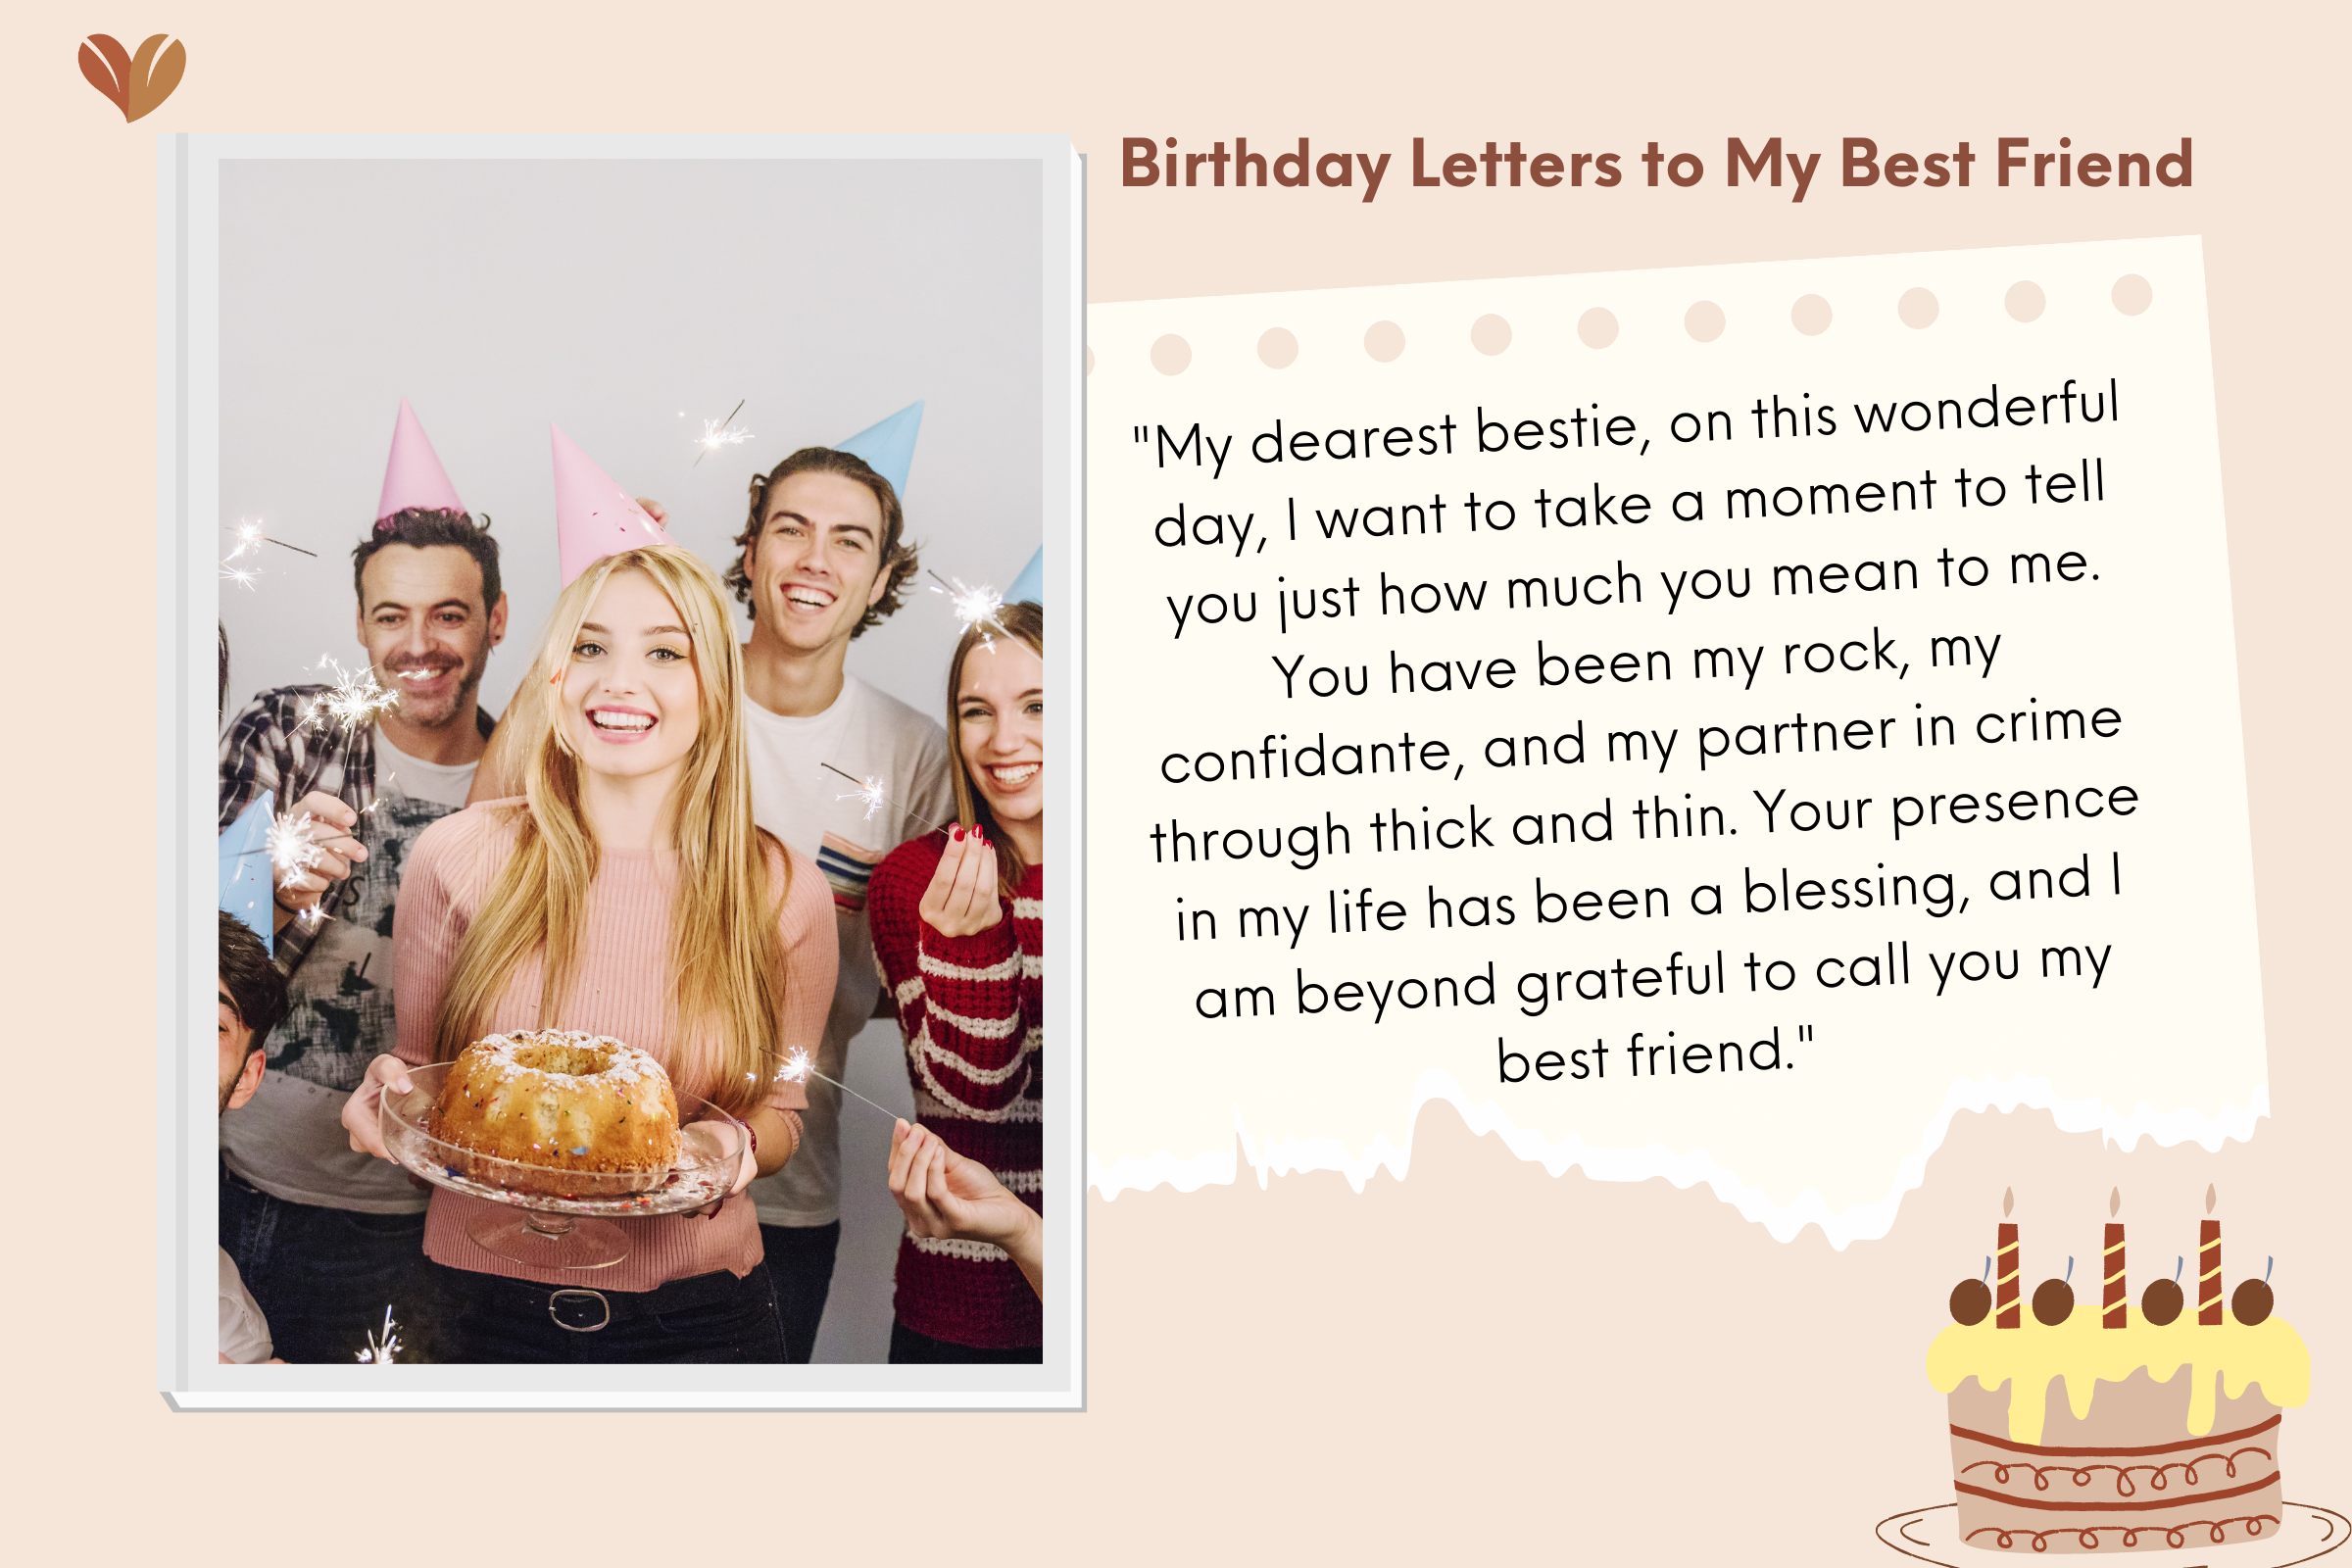 Birthday letters